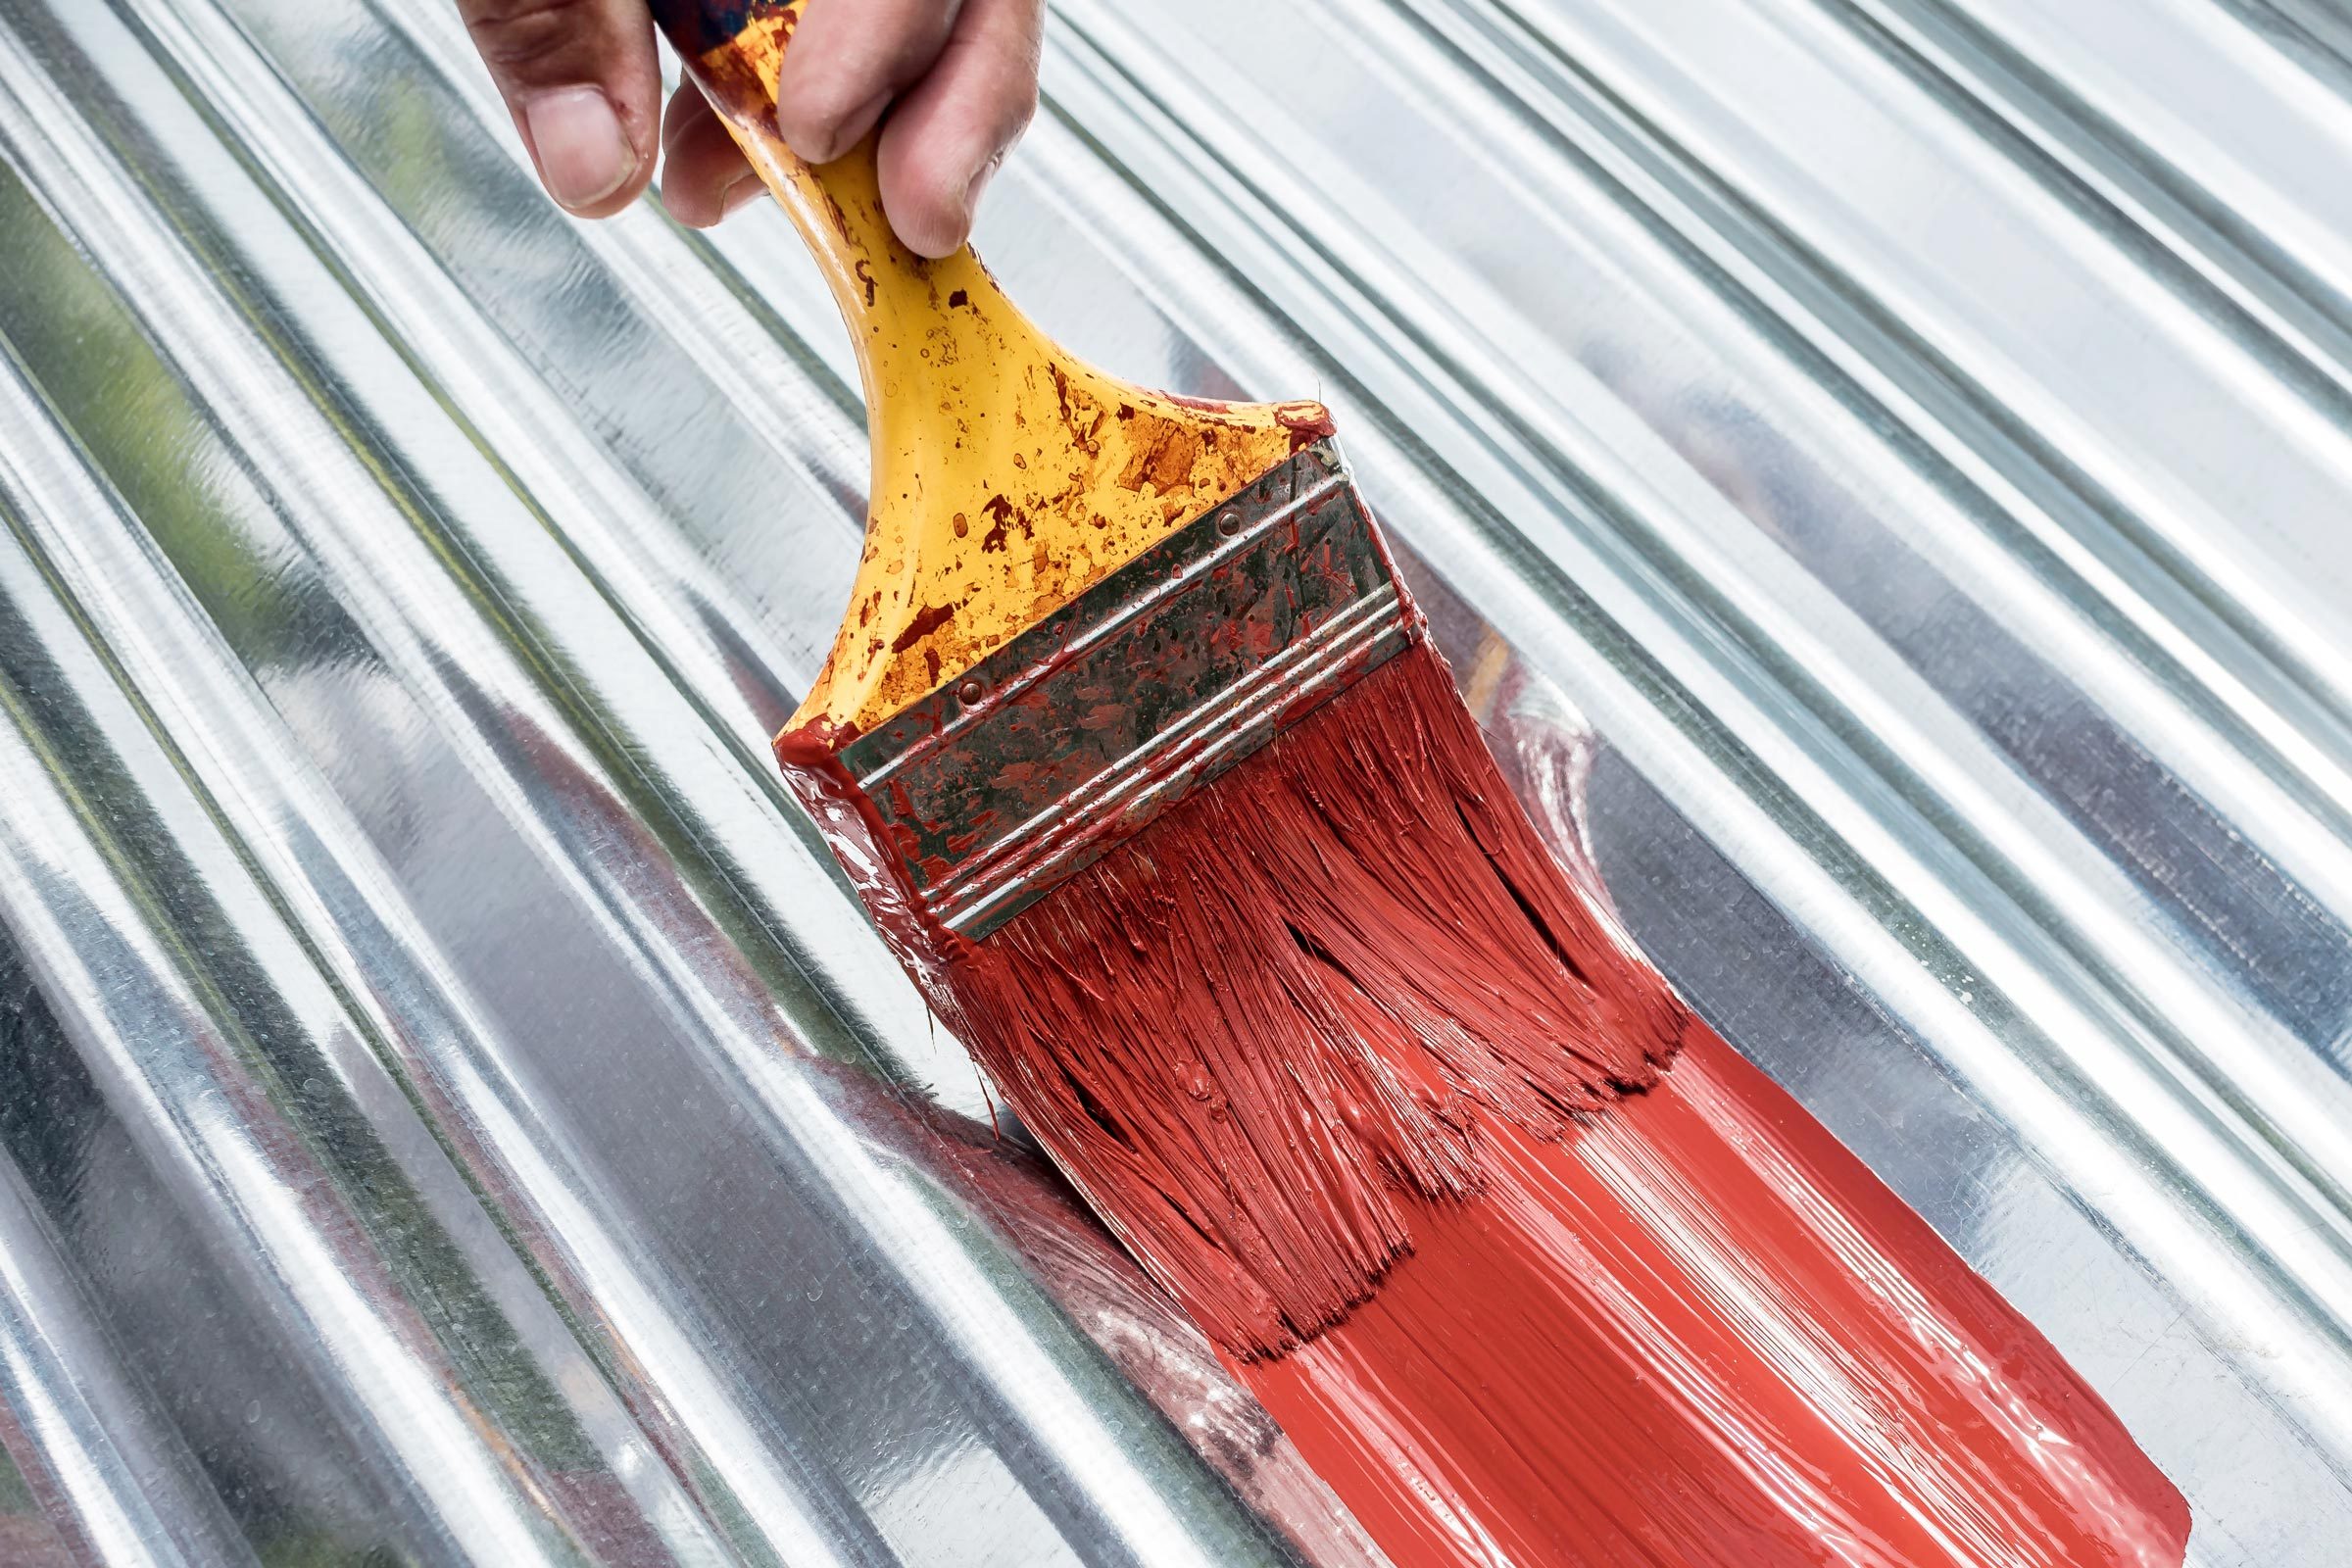 Painting Stainless Steel: The Complete How-To Guide